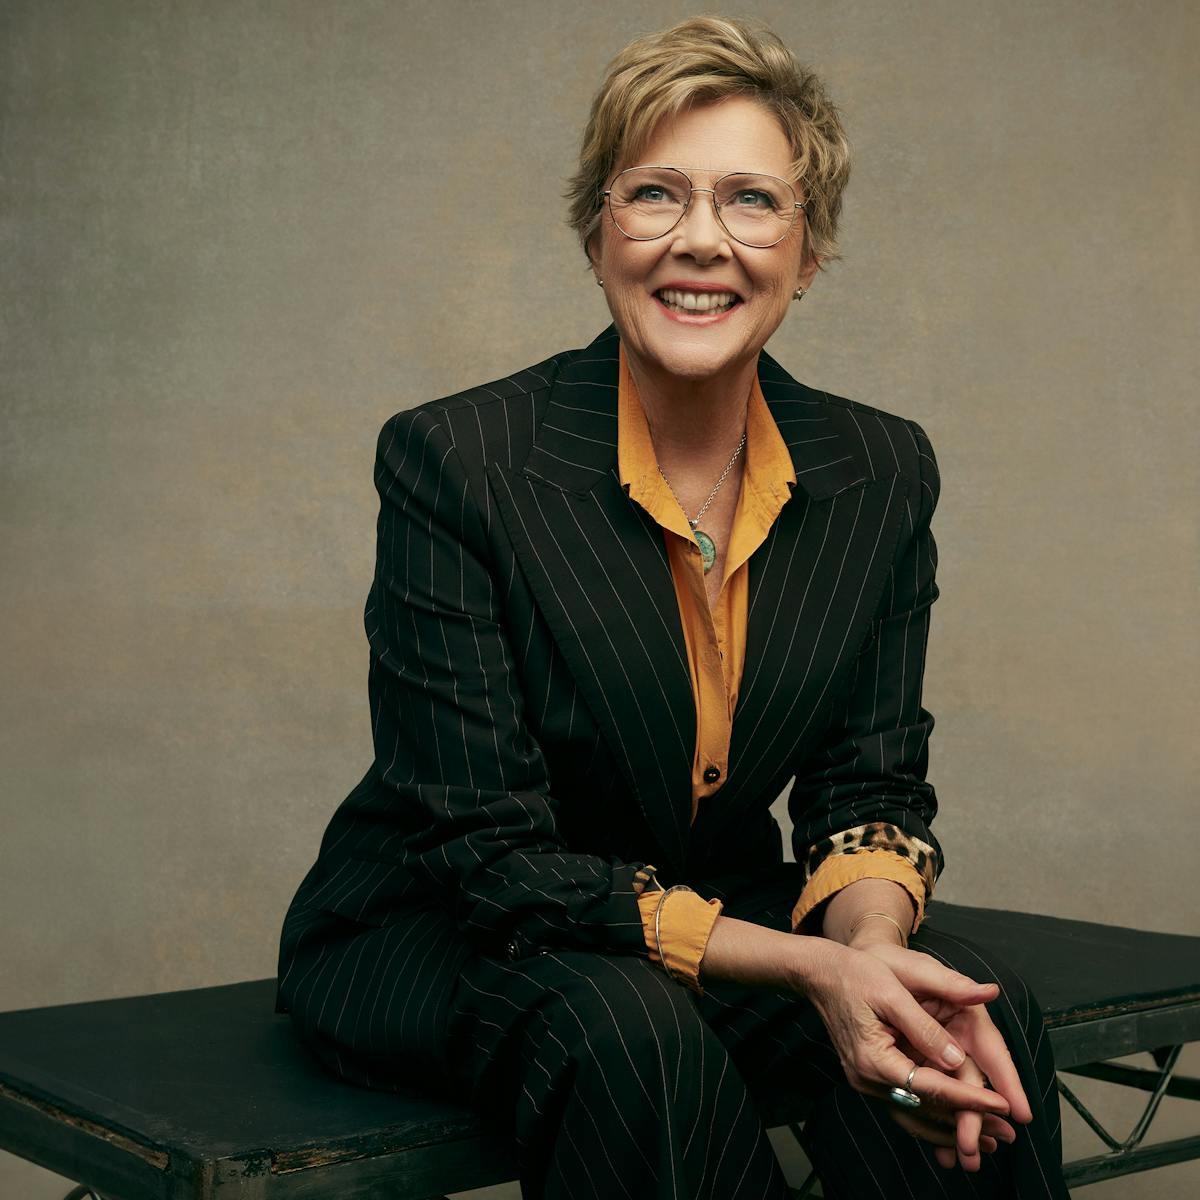 Annette Bening wears a black suit and a yellow shirt.